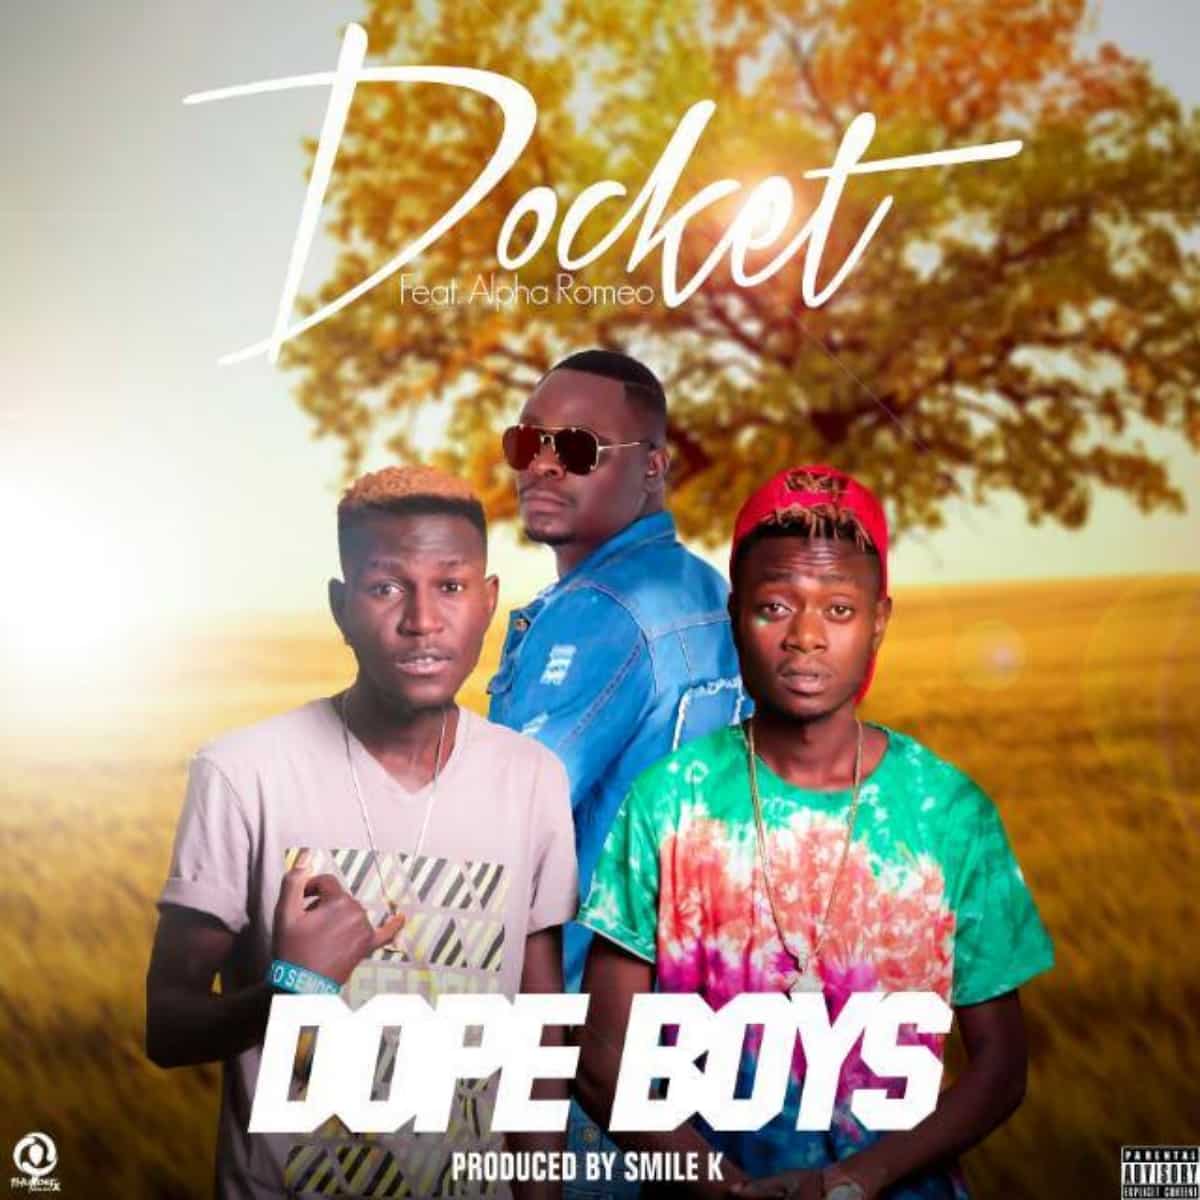 DOWNLOAD: Dope Boys Feat Alpha Romeo – “Docket” Mp3